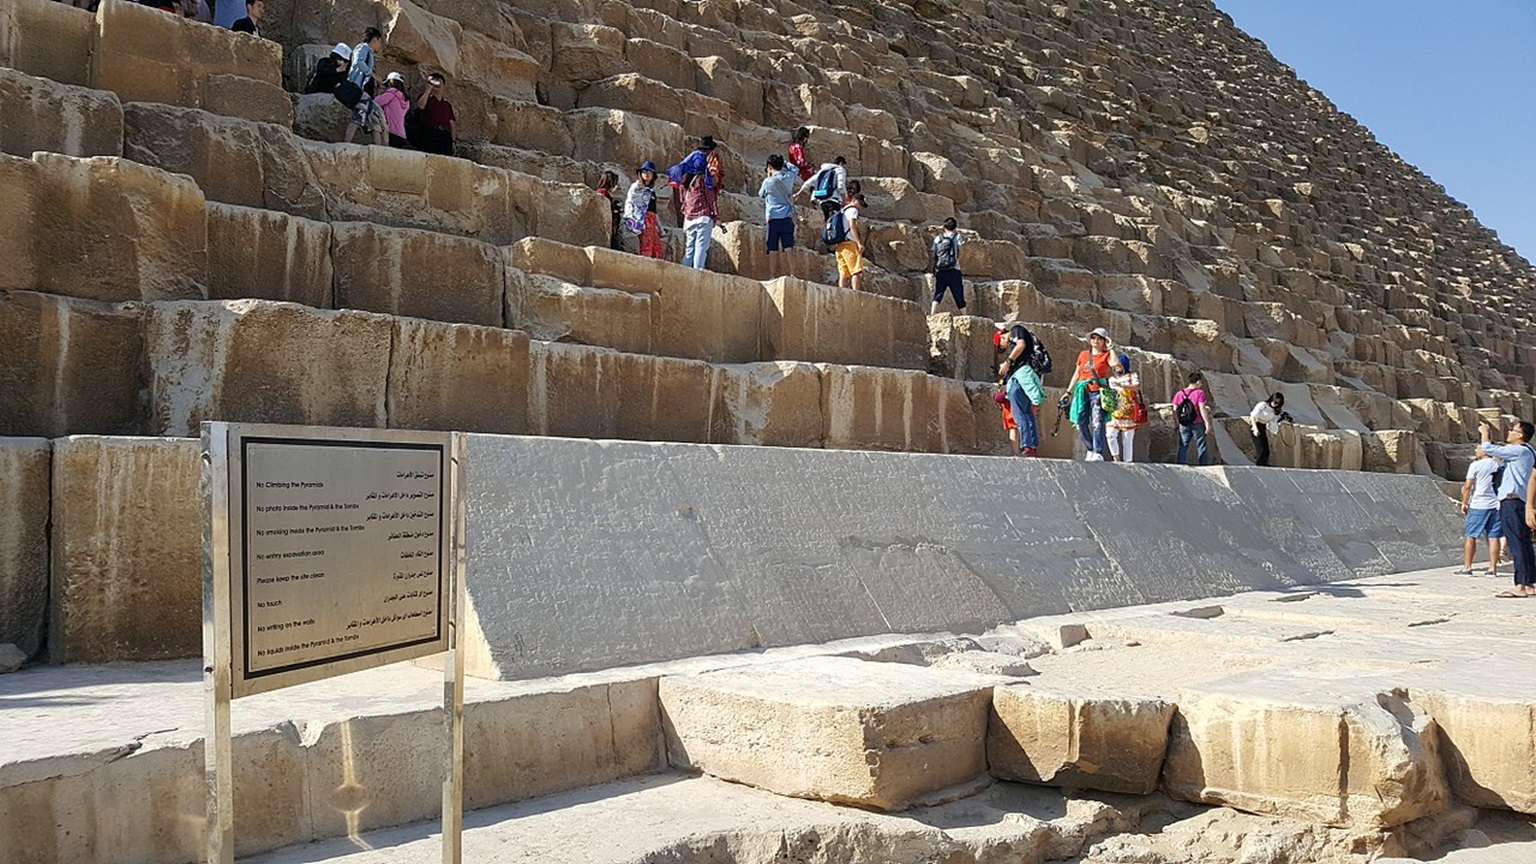 <p>The lack of boundaries when viewing the attraction has caused some <strong>serious damage</strong><strong> to the pyramids. </strong>Decades of tourism—the vandalism and footsteps—have caused one of the Seven Wonders of the Ancient World to deteriorate.</p>  <p>They key to enjoying the Pyramids of Giza might be to<strong> book your trip during the off season.</strong></p>